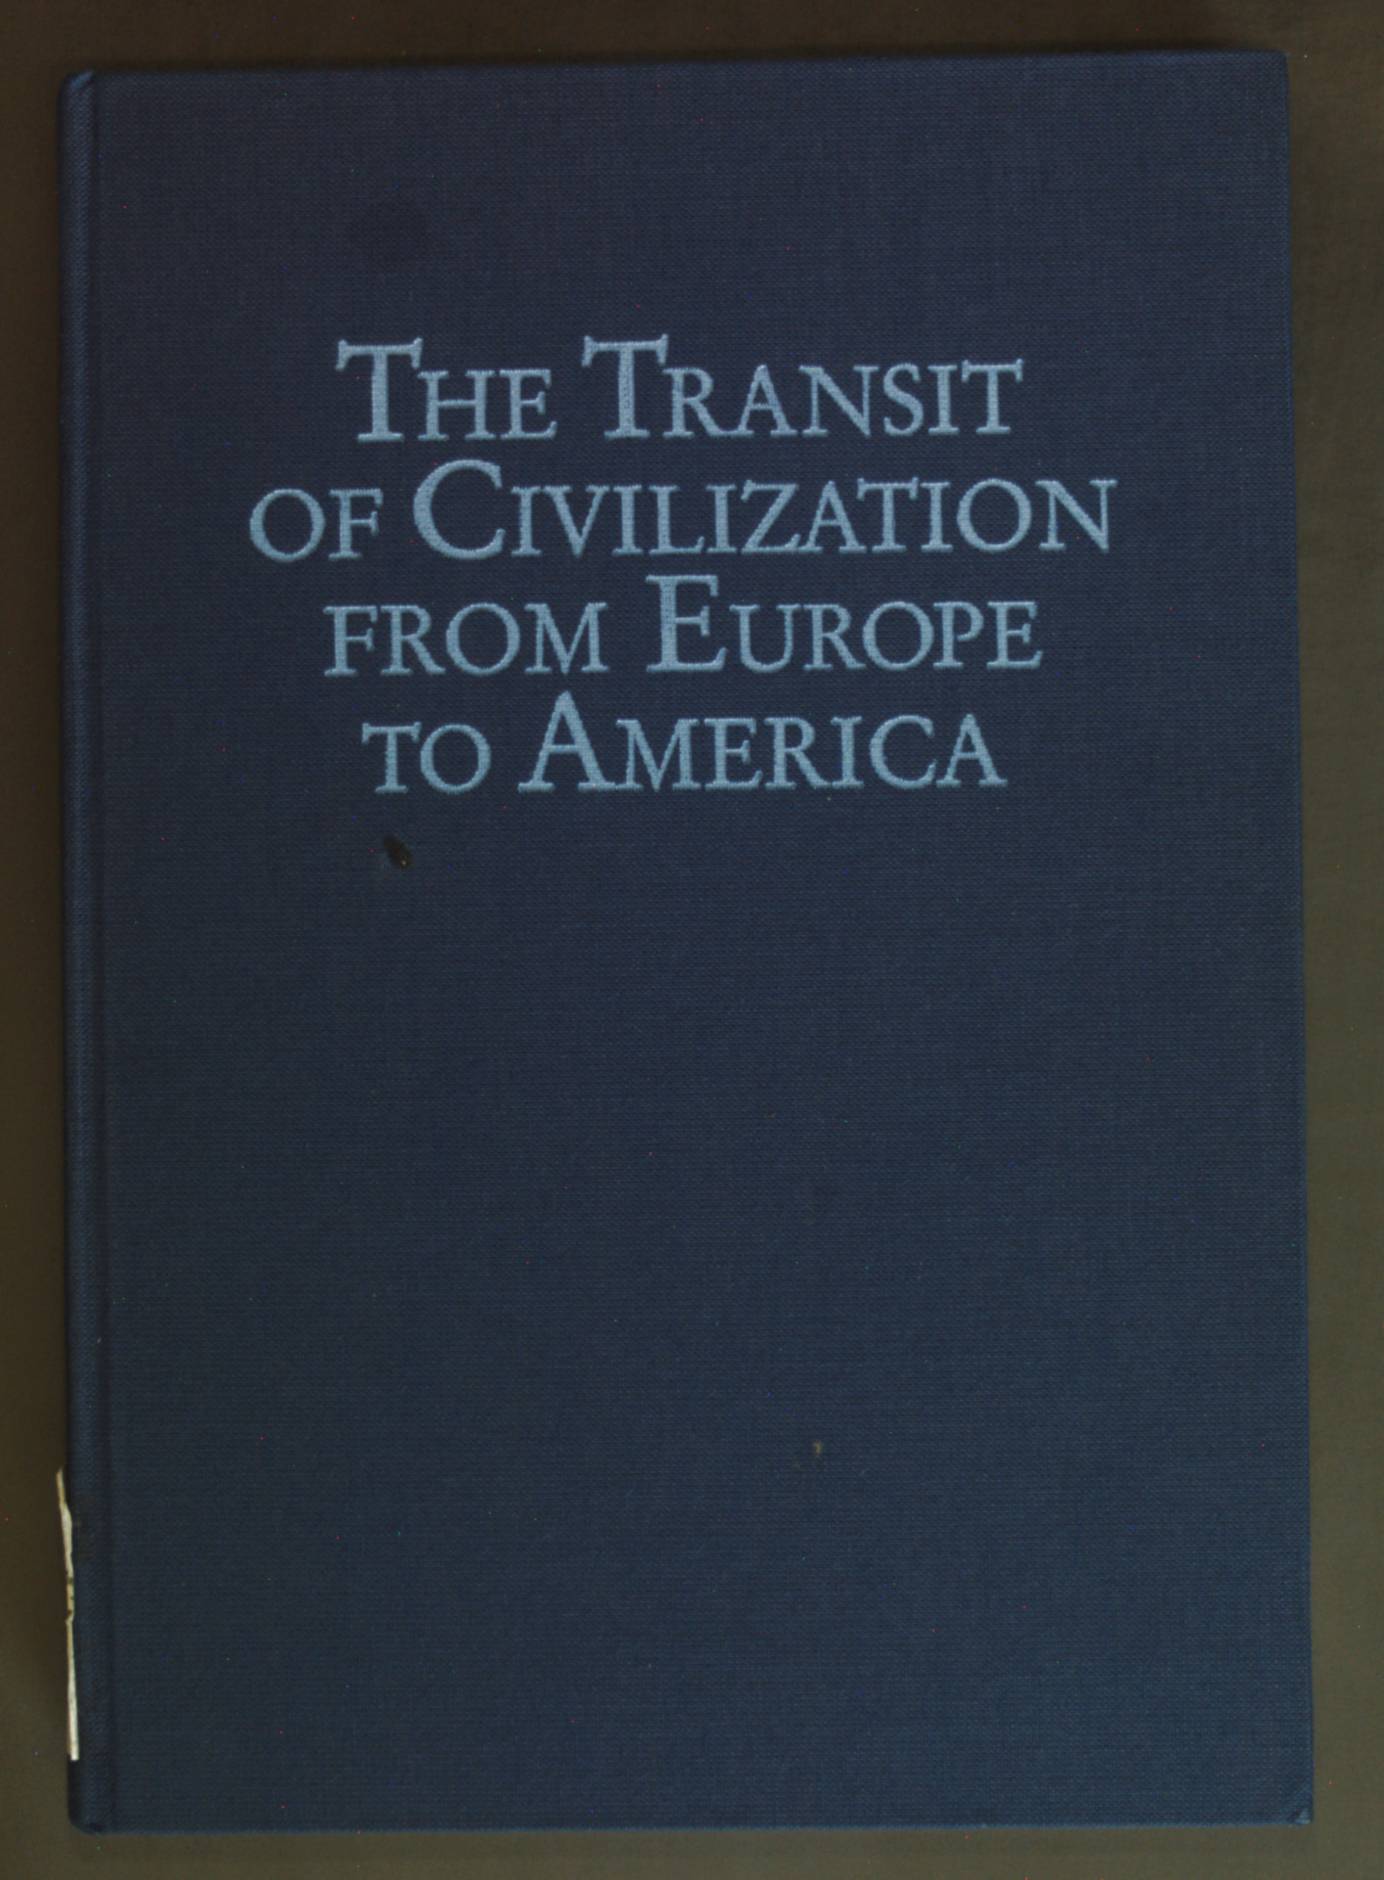 The Transit of Civilization from Europe to America: Essays in Honor of Hans Galinsky